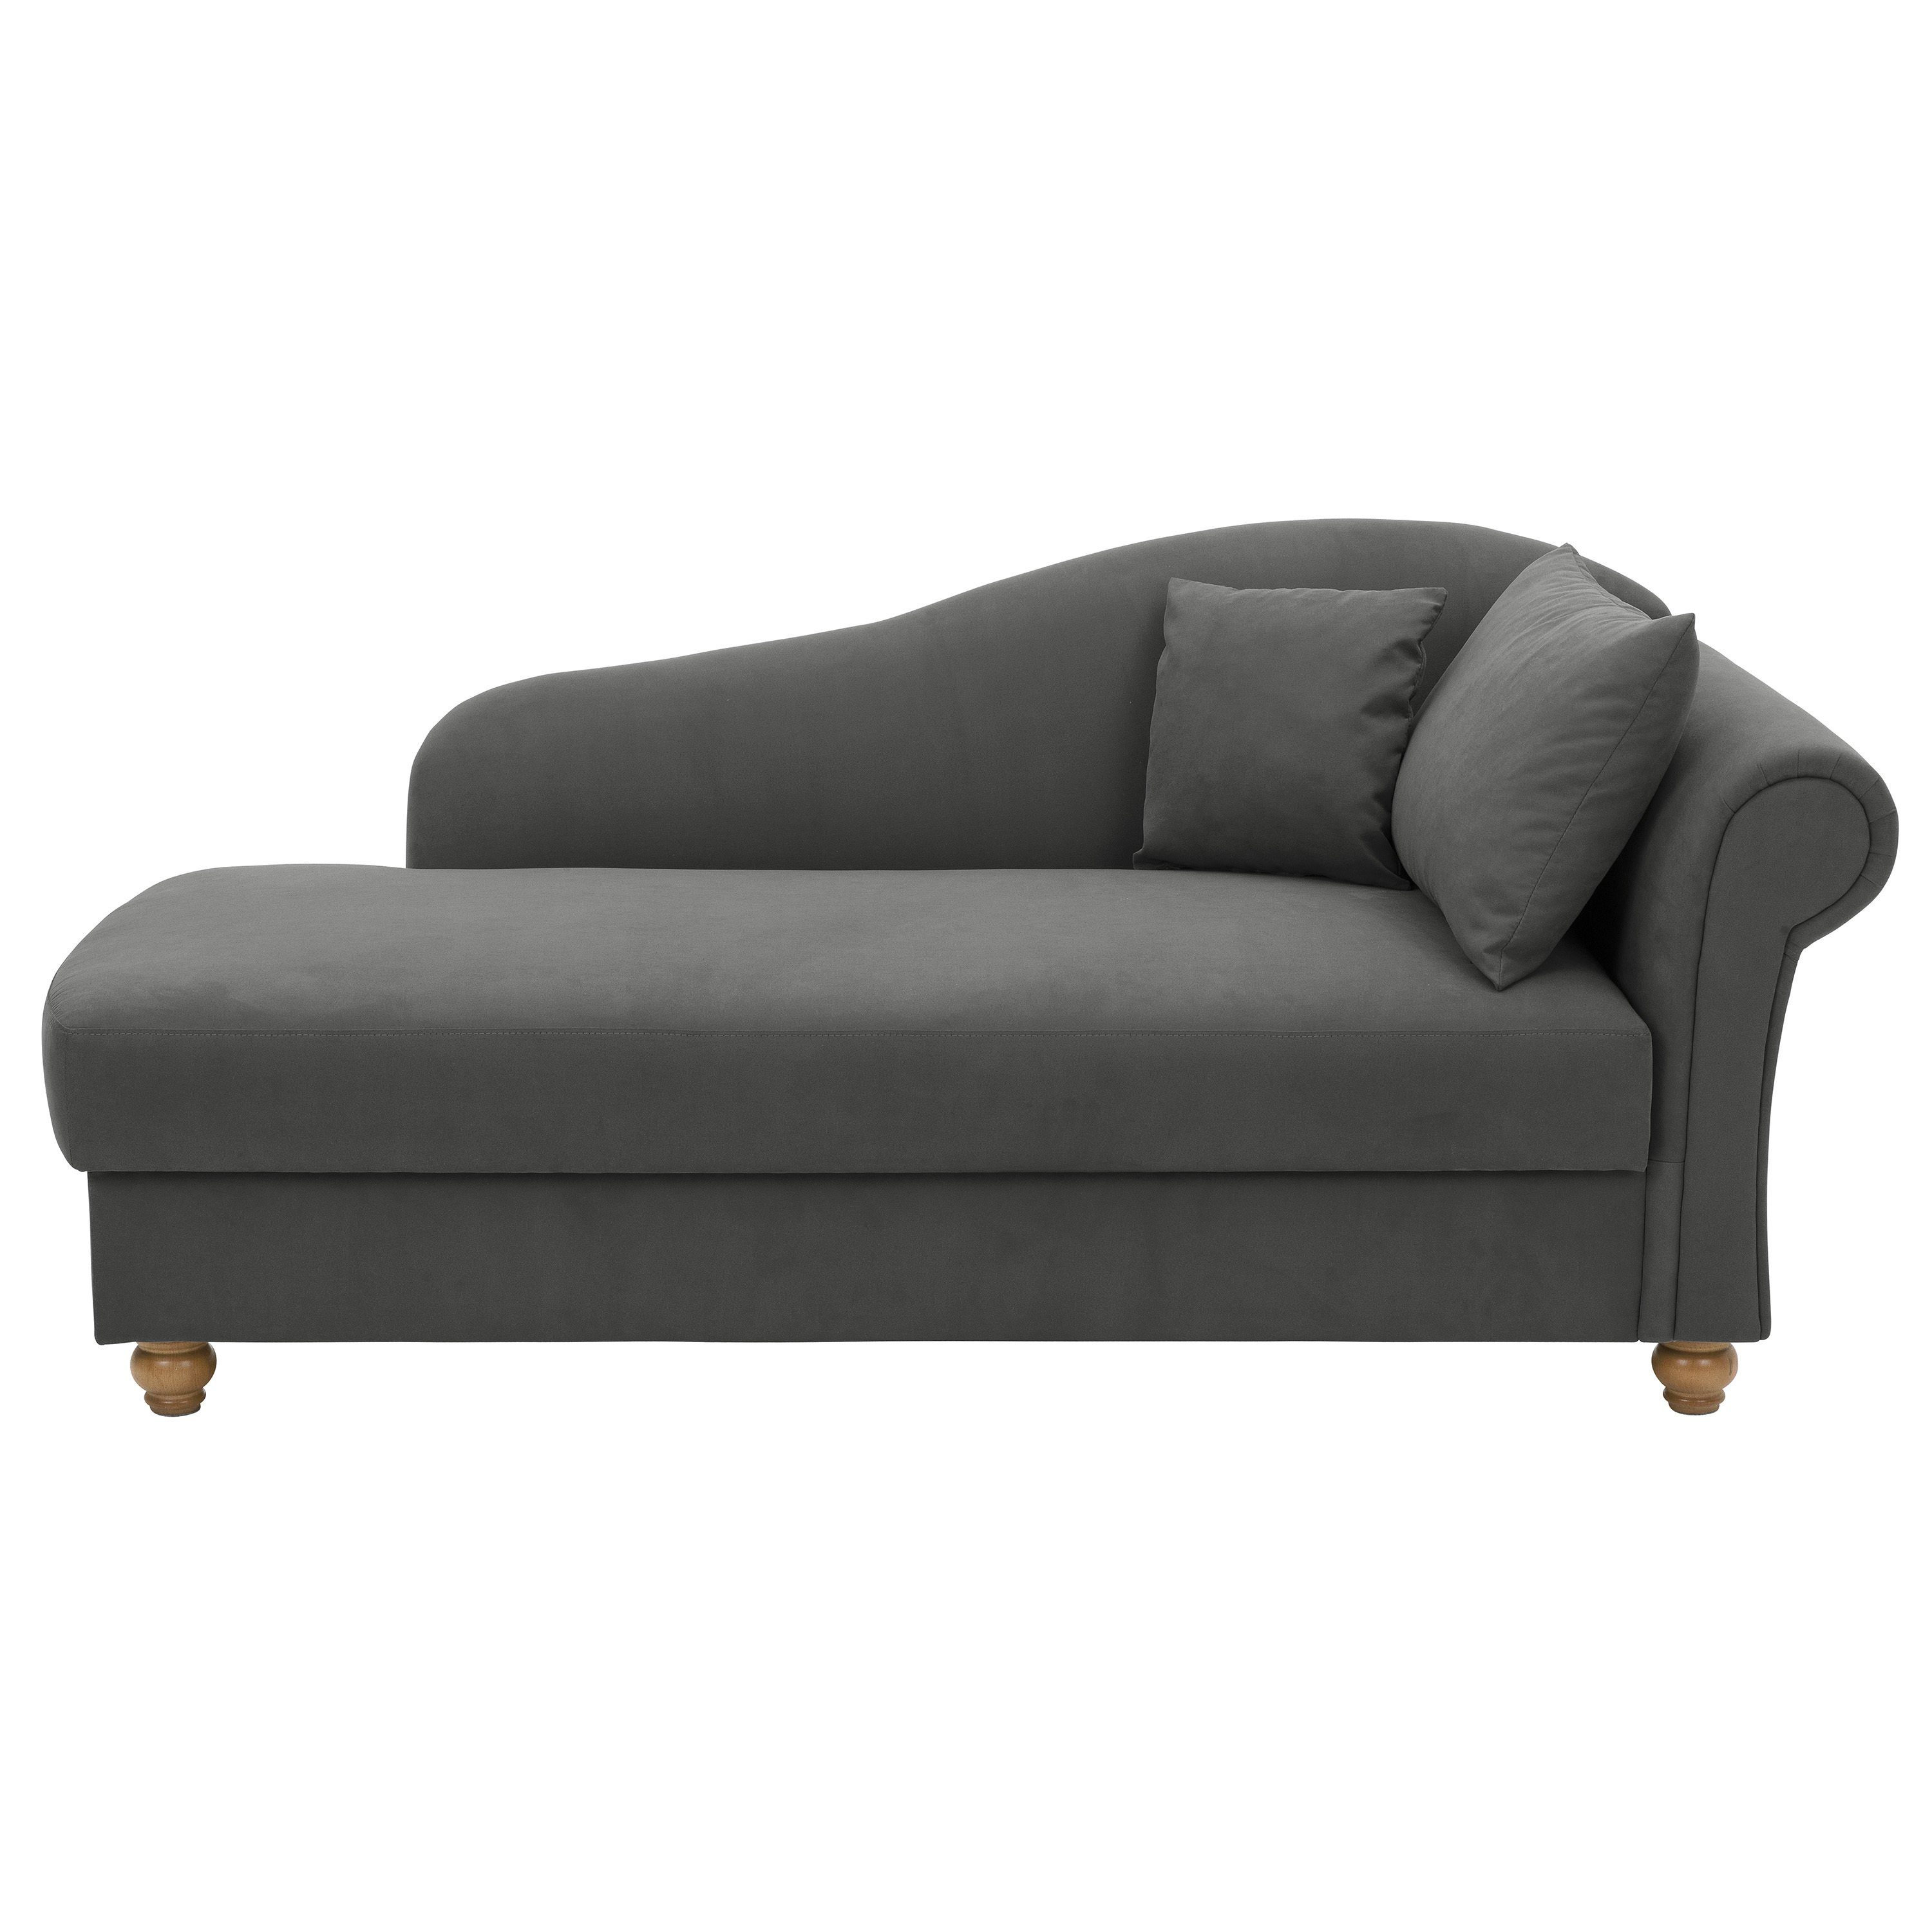 rechts Winzer® Max Sofa Recamiere Armlehne Evelyn,